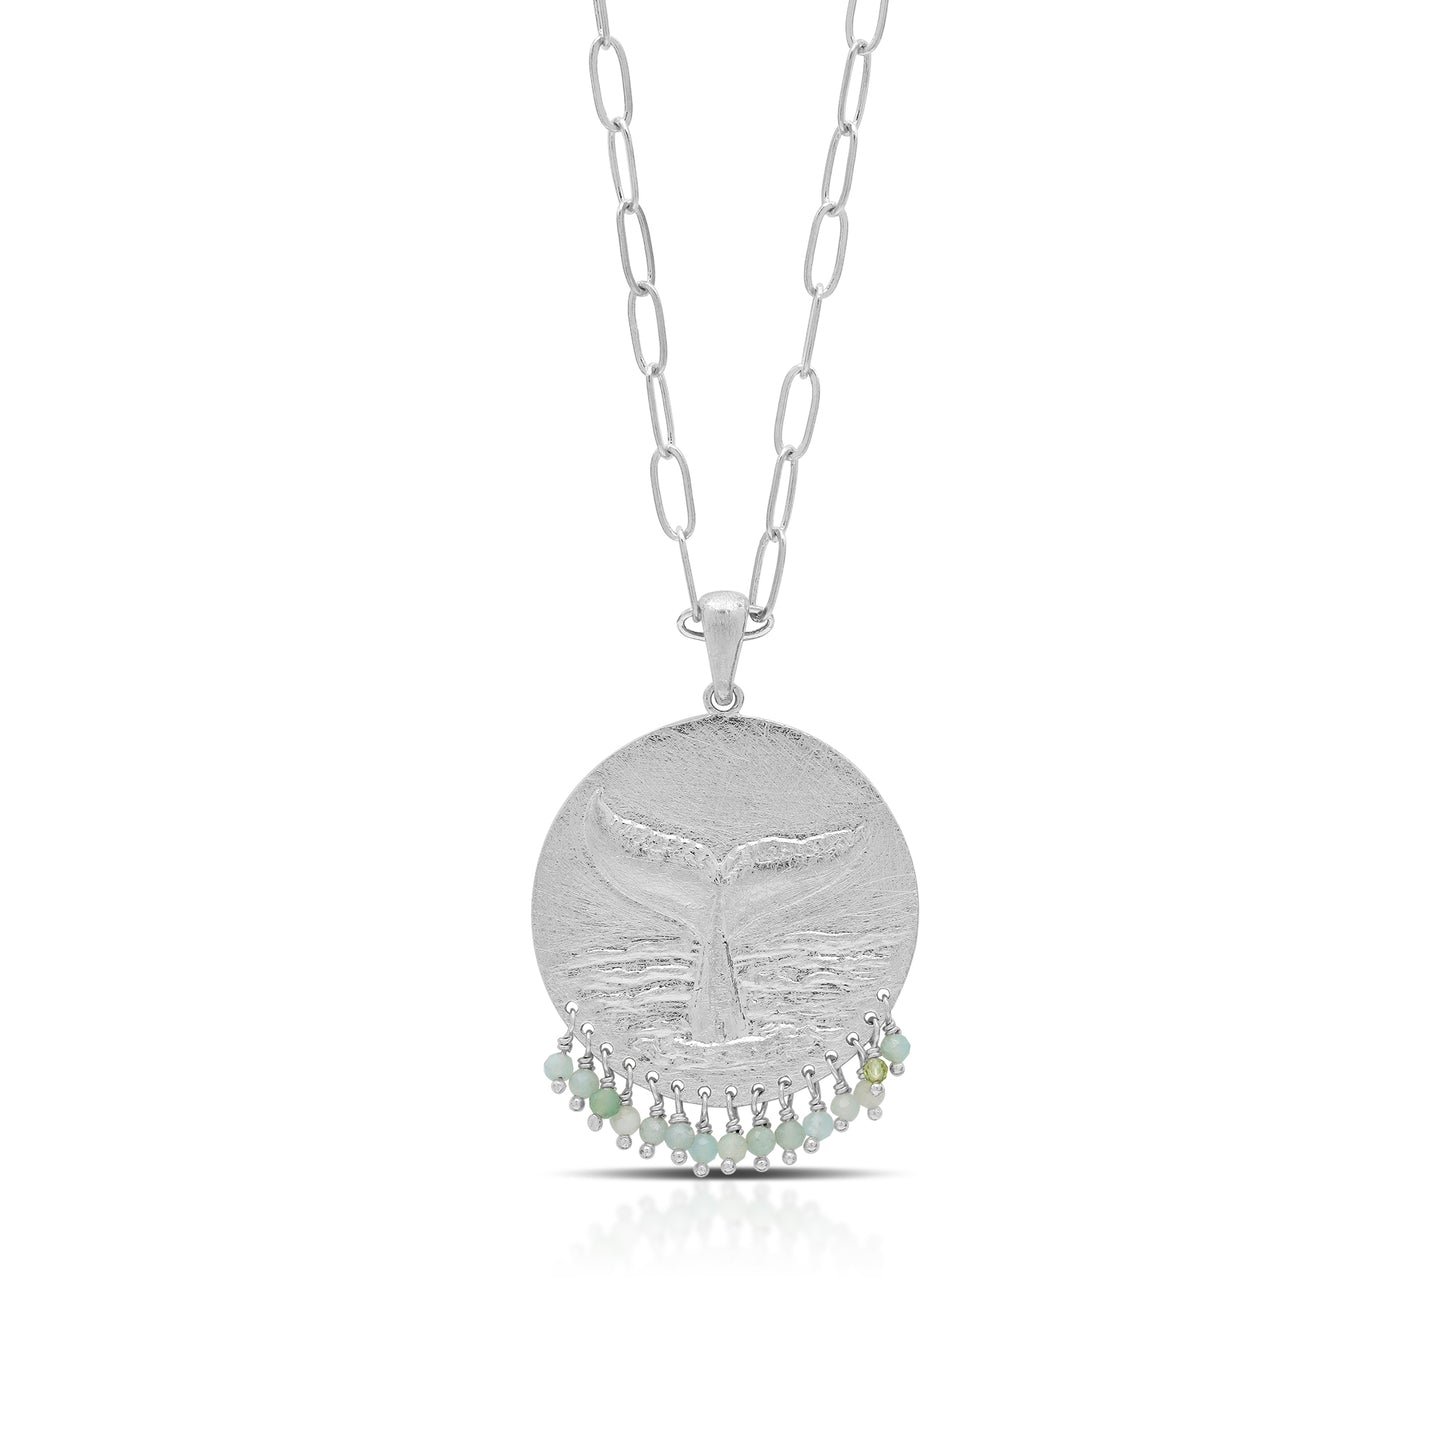 Whale Tail Fringed Necklace